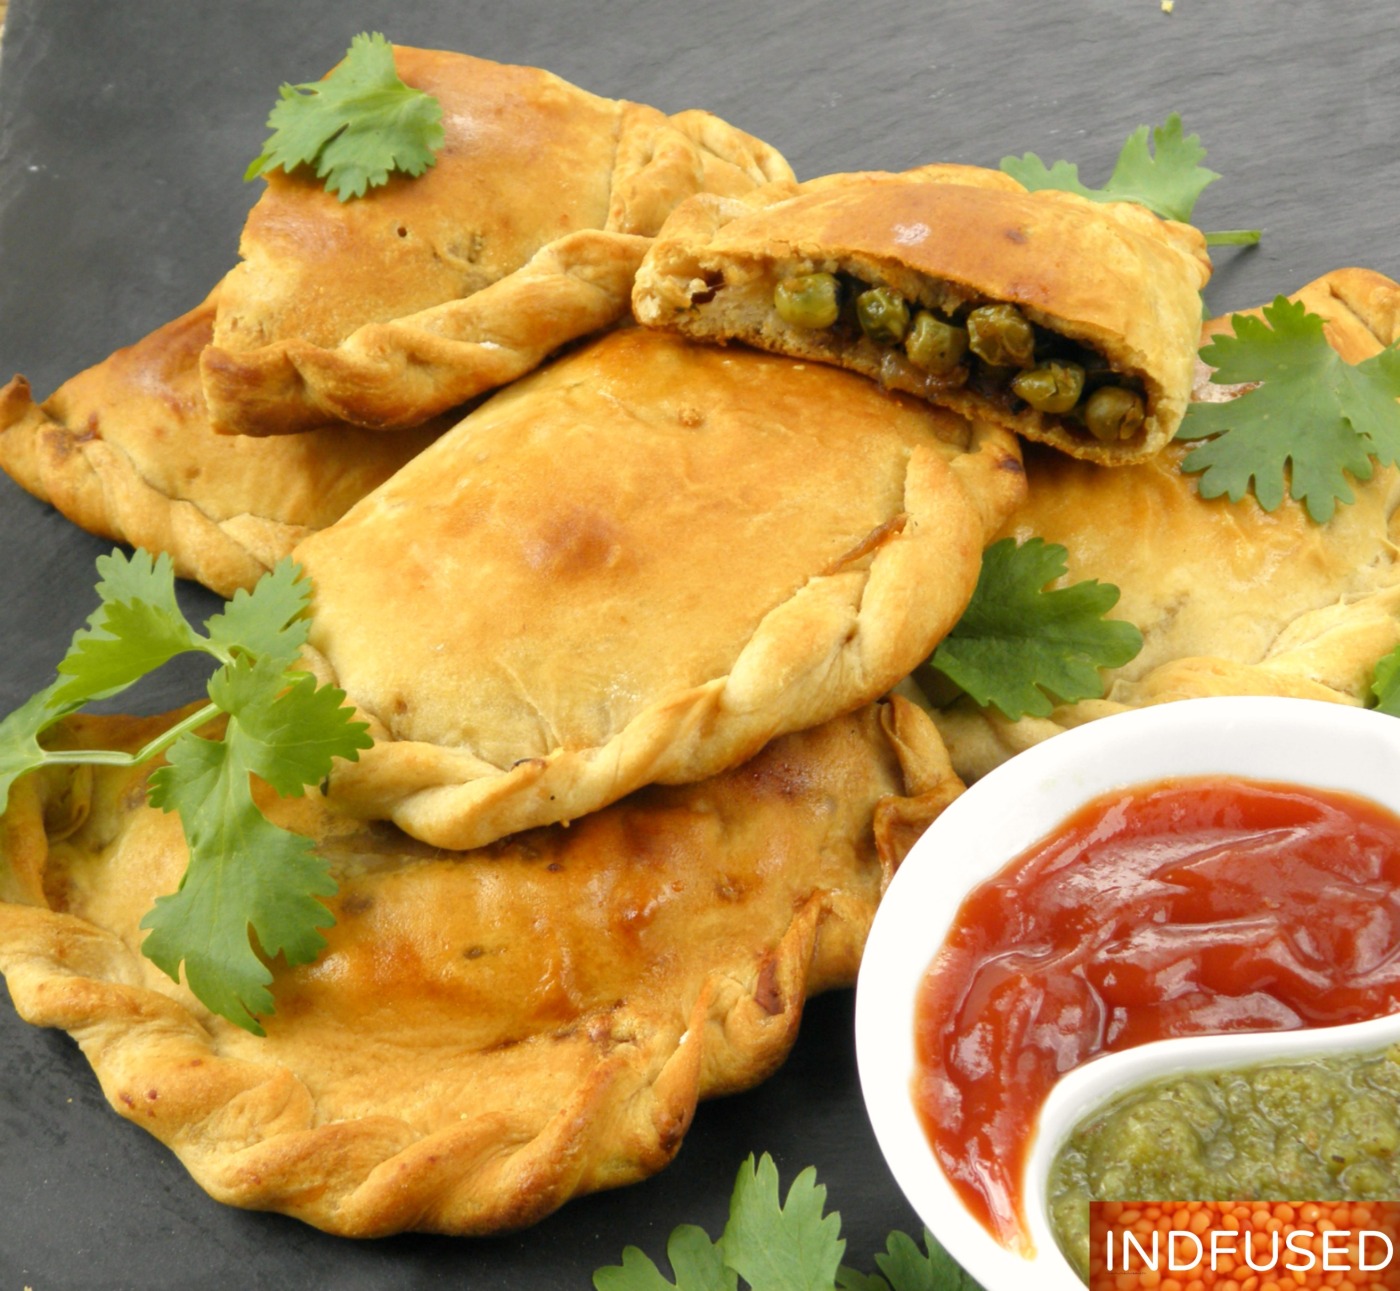 Indian Fusion hand pies with savory green peas, onion and cheese filling made easy using Pillsbury biscuit dough!